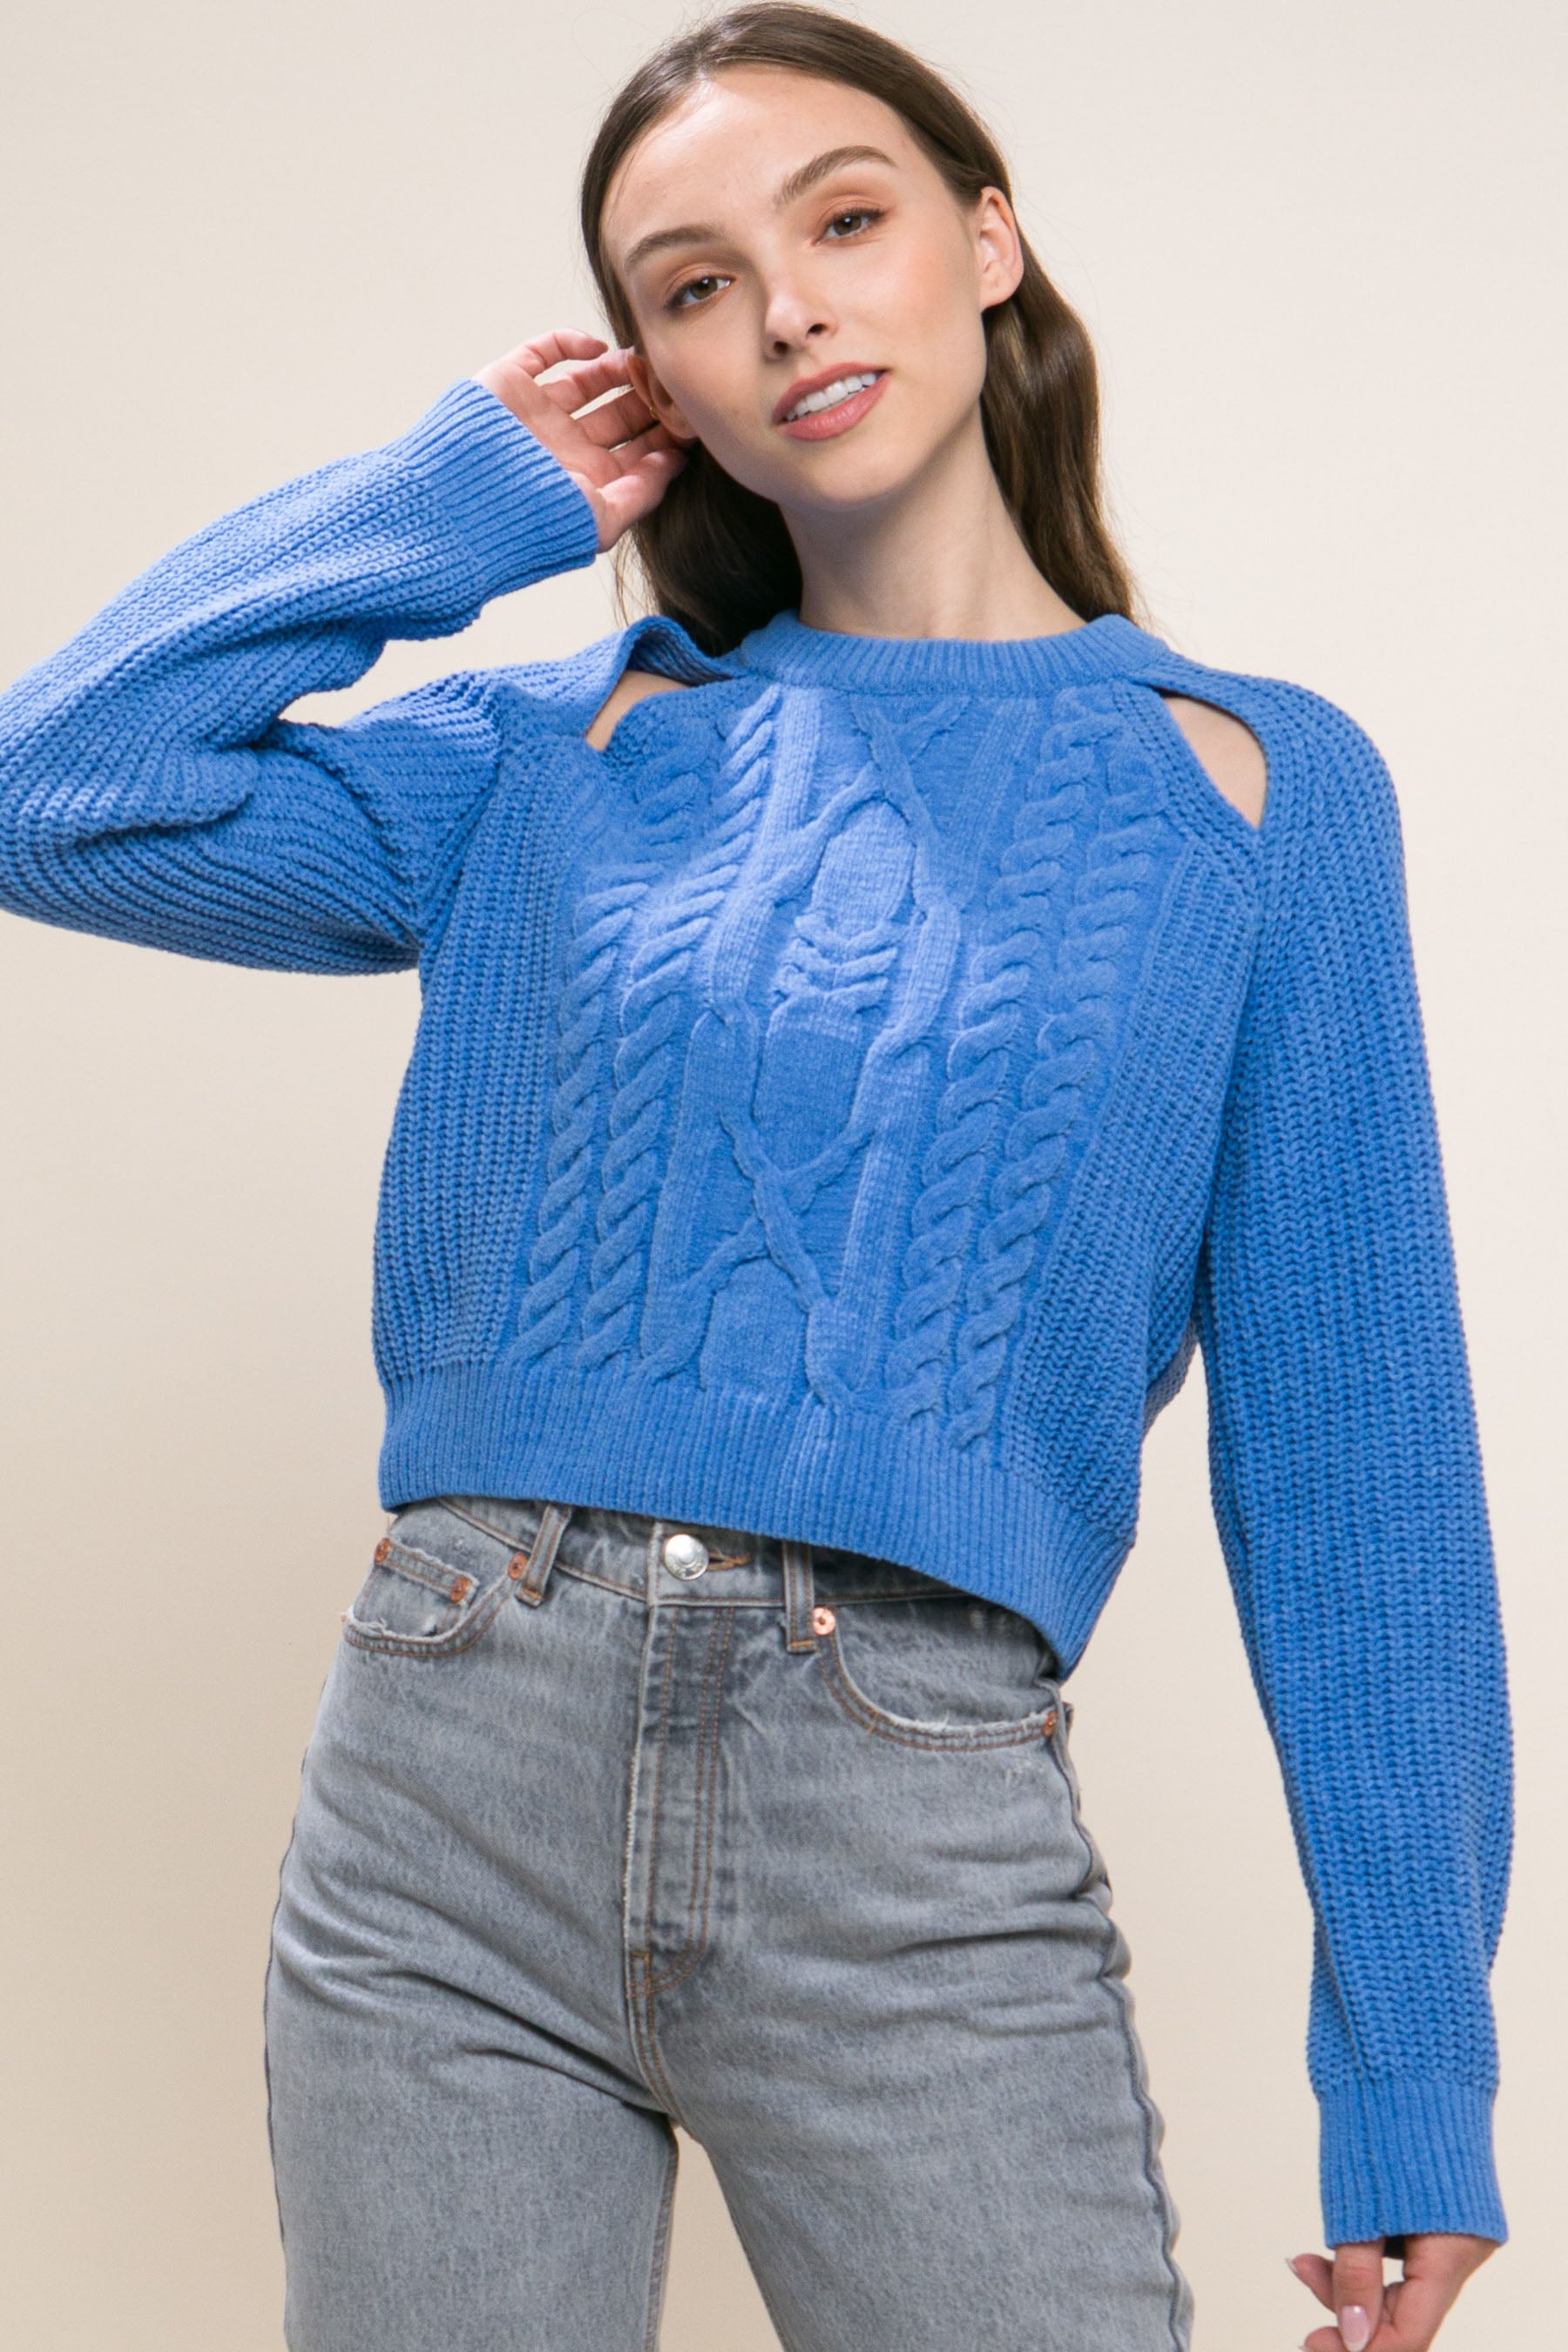 - Women's Knit Pullover Sweater With Cold Shoulder Detail - 4 colors - womens sweater at TFC&H Co.